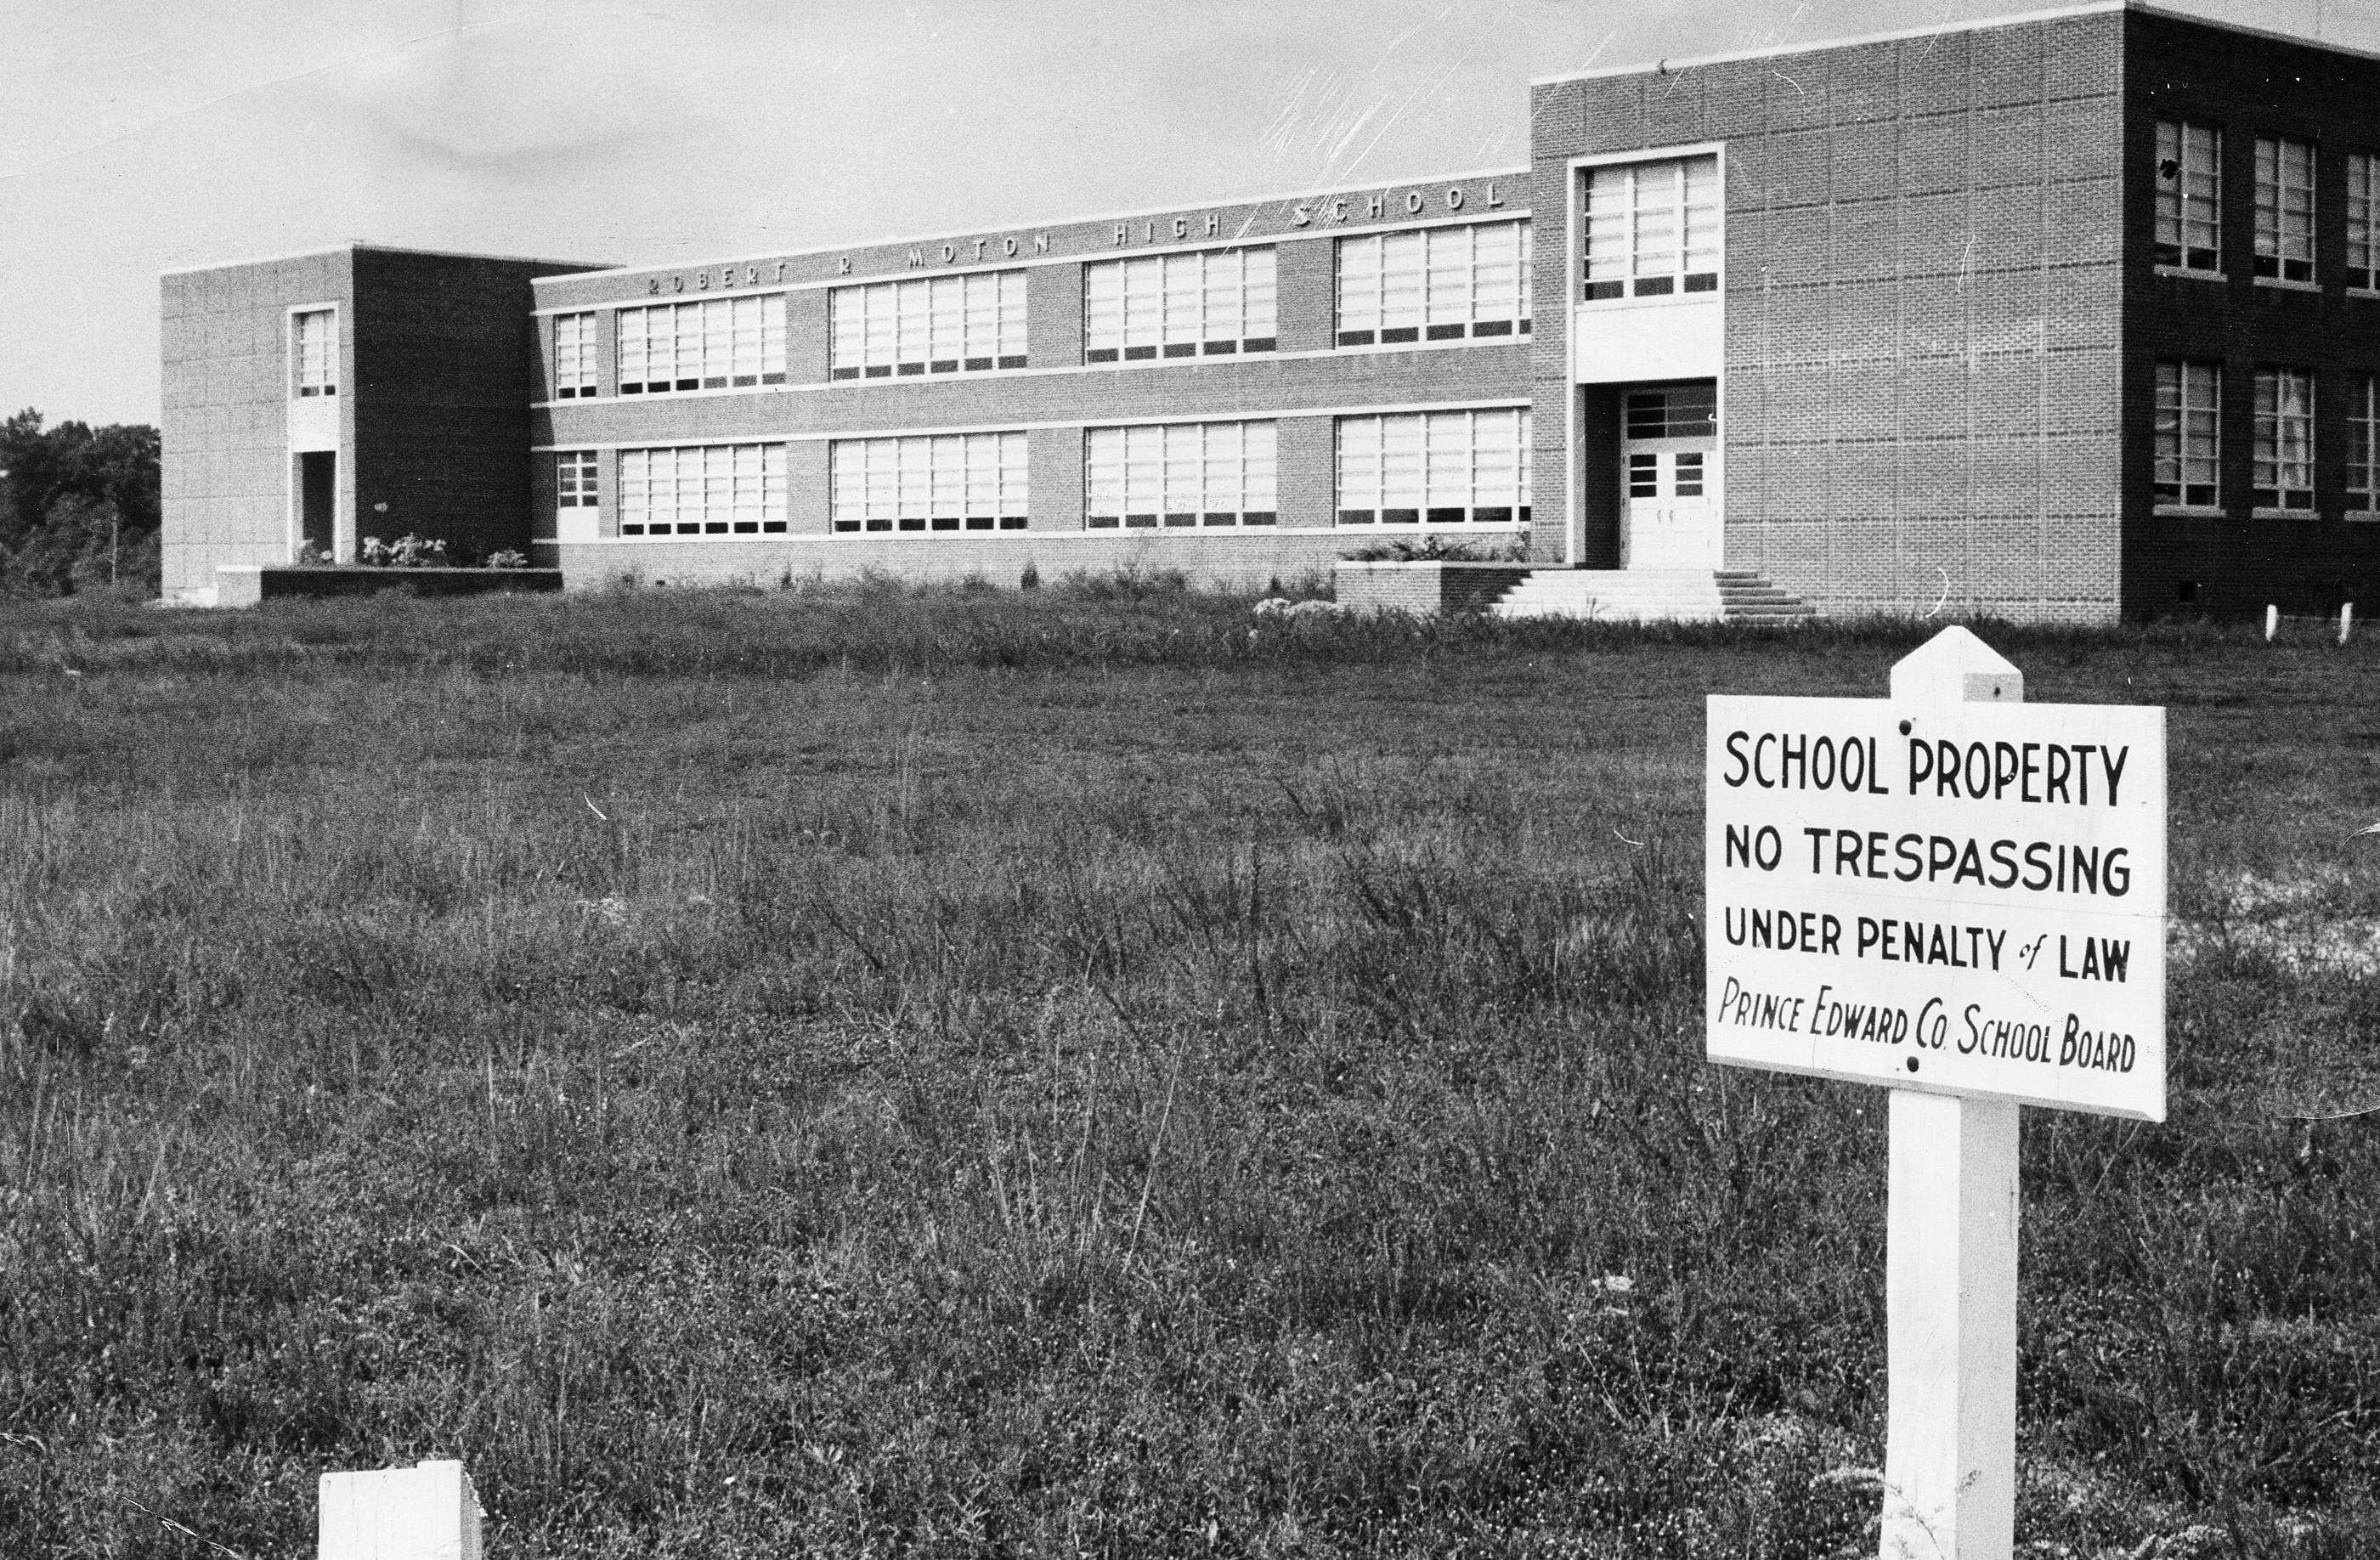 An image of a closed school with a no trespassing sign